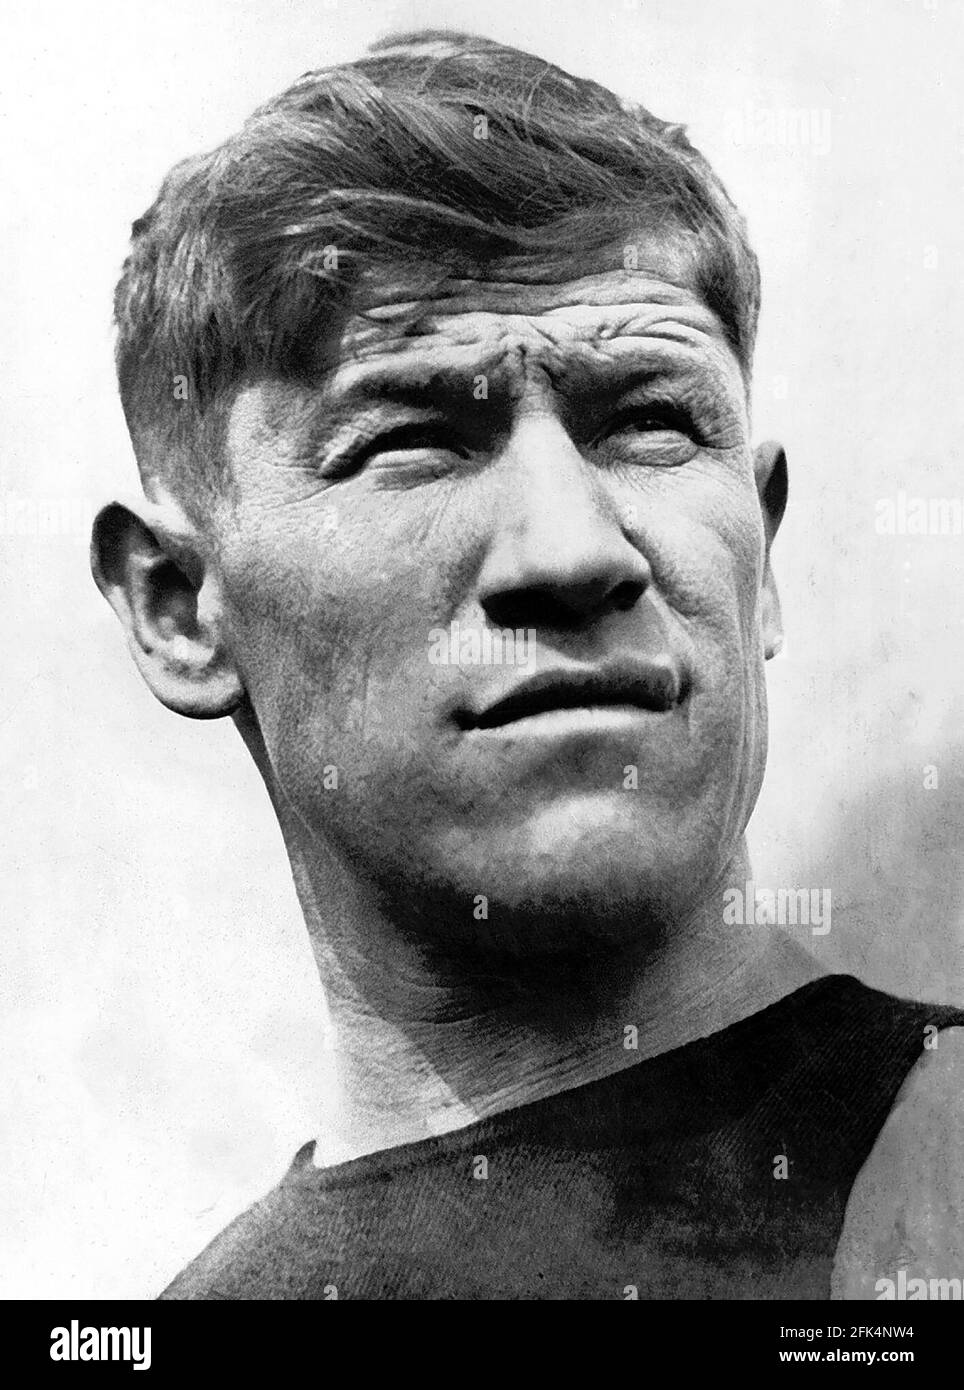 Jim Thorpe. Portrait of the American athlete and Olympic gold medallist, James Francis Thorpe (1887-1953), 1912 Stock Photo